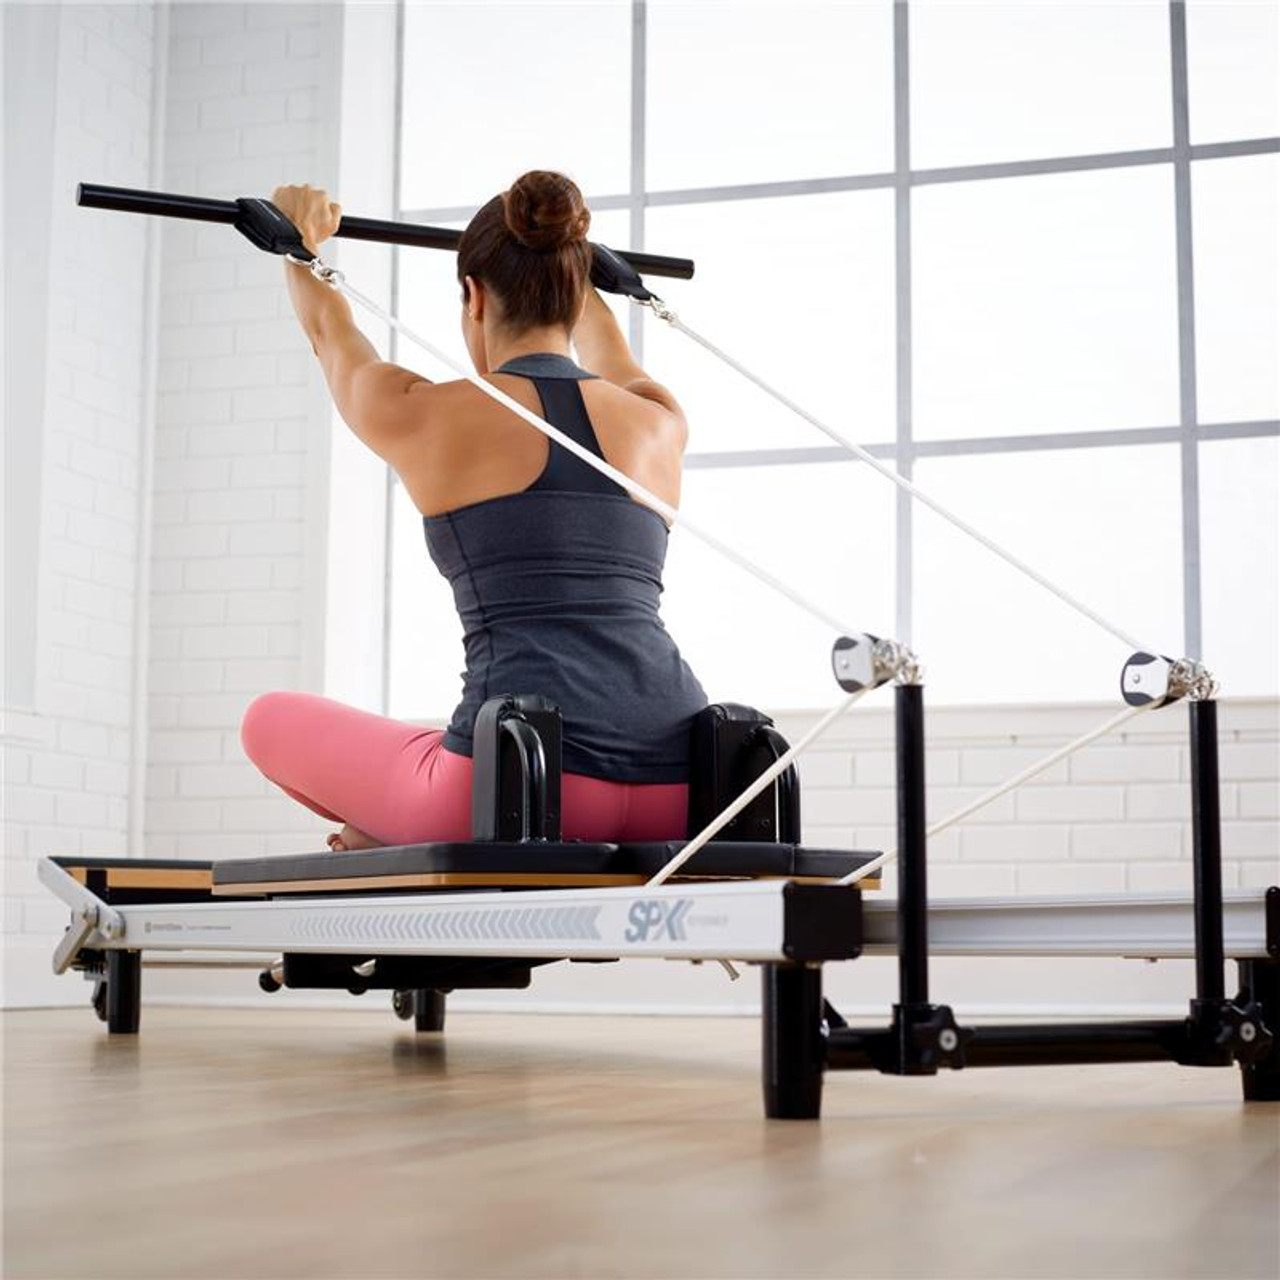 At Home SPX Reformer Athletic Conditioning Package with Cardio-Tramp by  Merrithew/STOTT PILATES